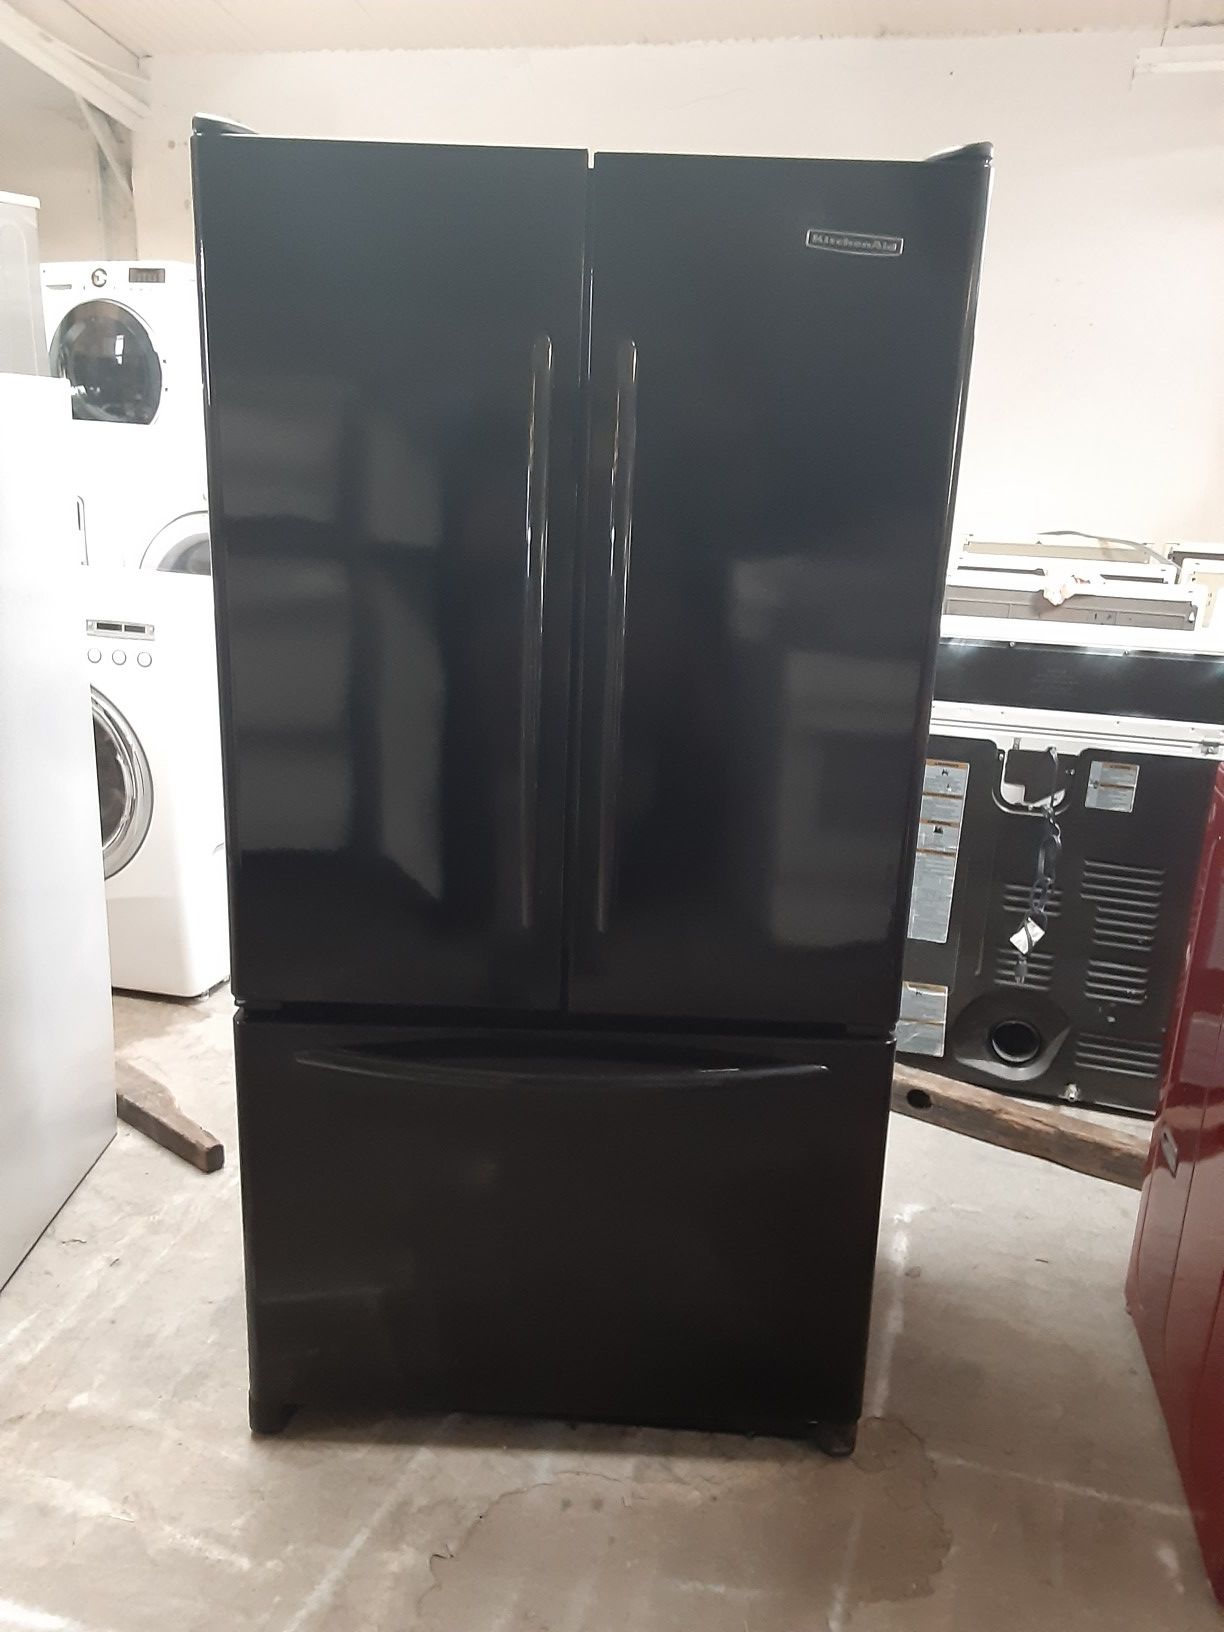 Refrigerator kitchen Aid good condition water and ice maker inside 3 months warranty delivery and install